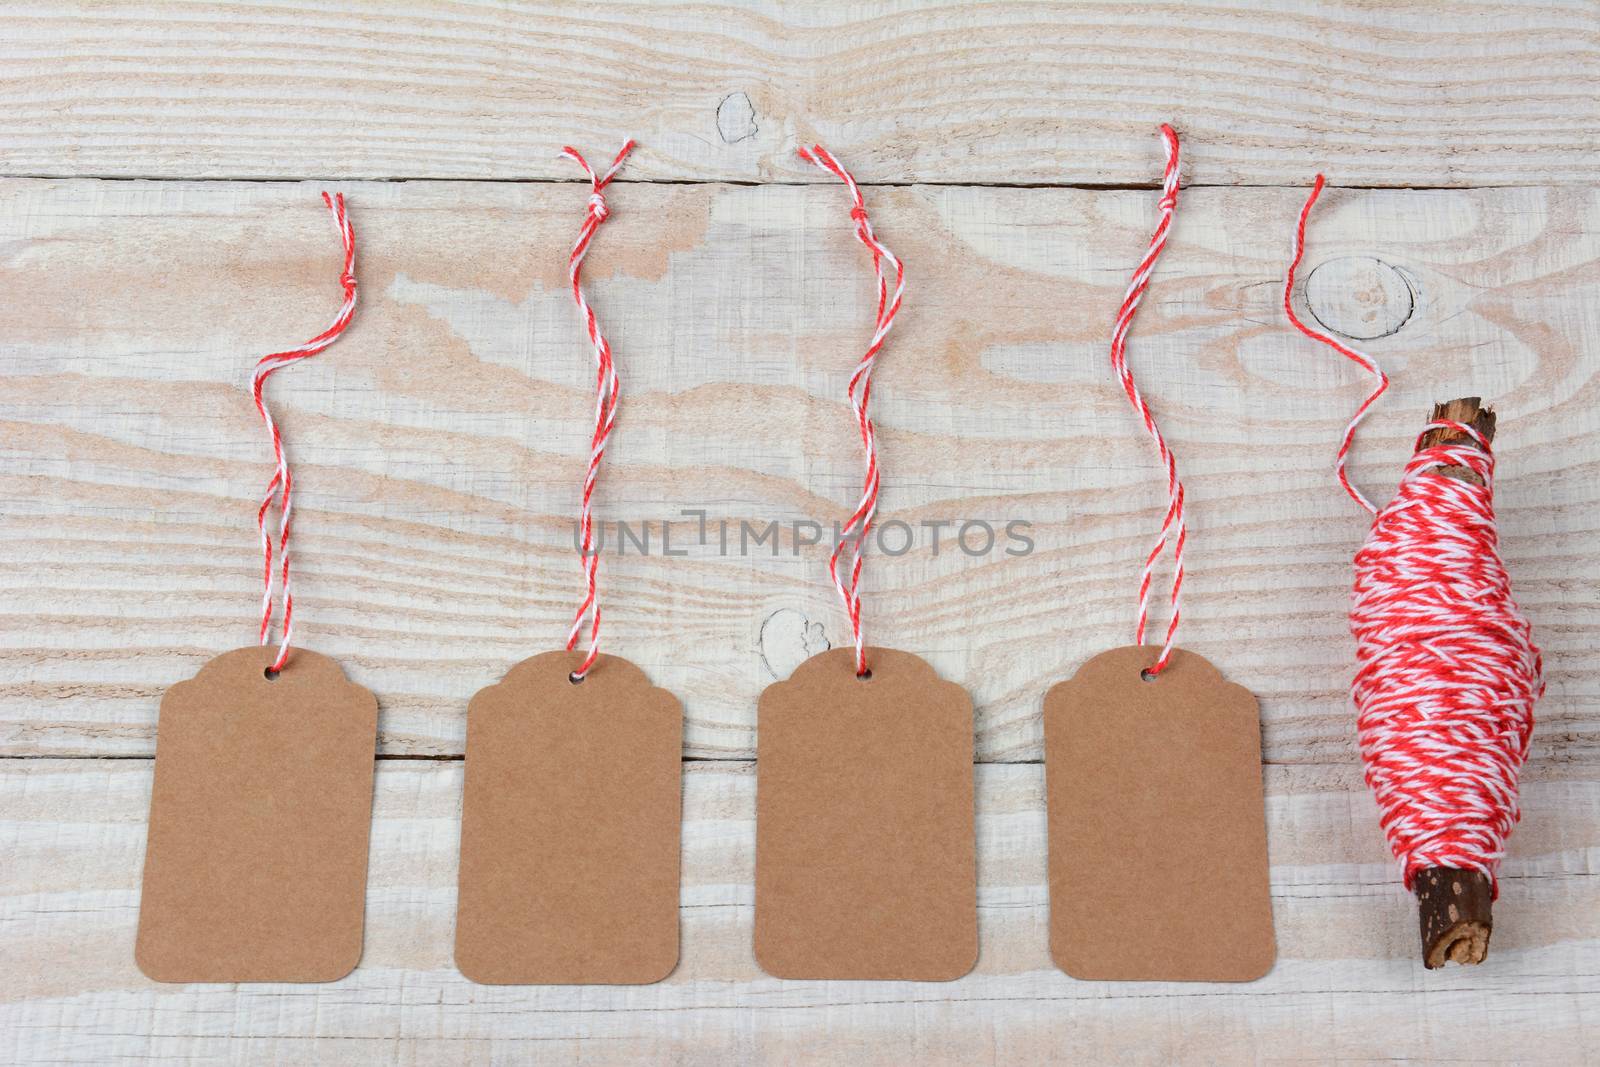 Overhead shot of four blank gift tags and red and white string wrapped around a twig laying on a rustic whitewashed wooden table. Horizontal format.